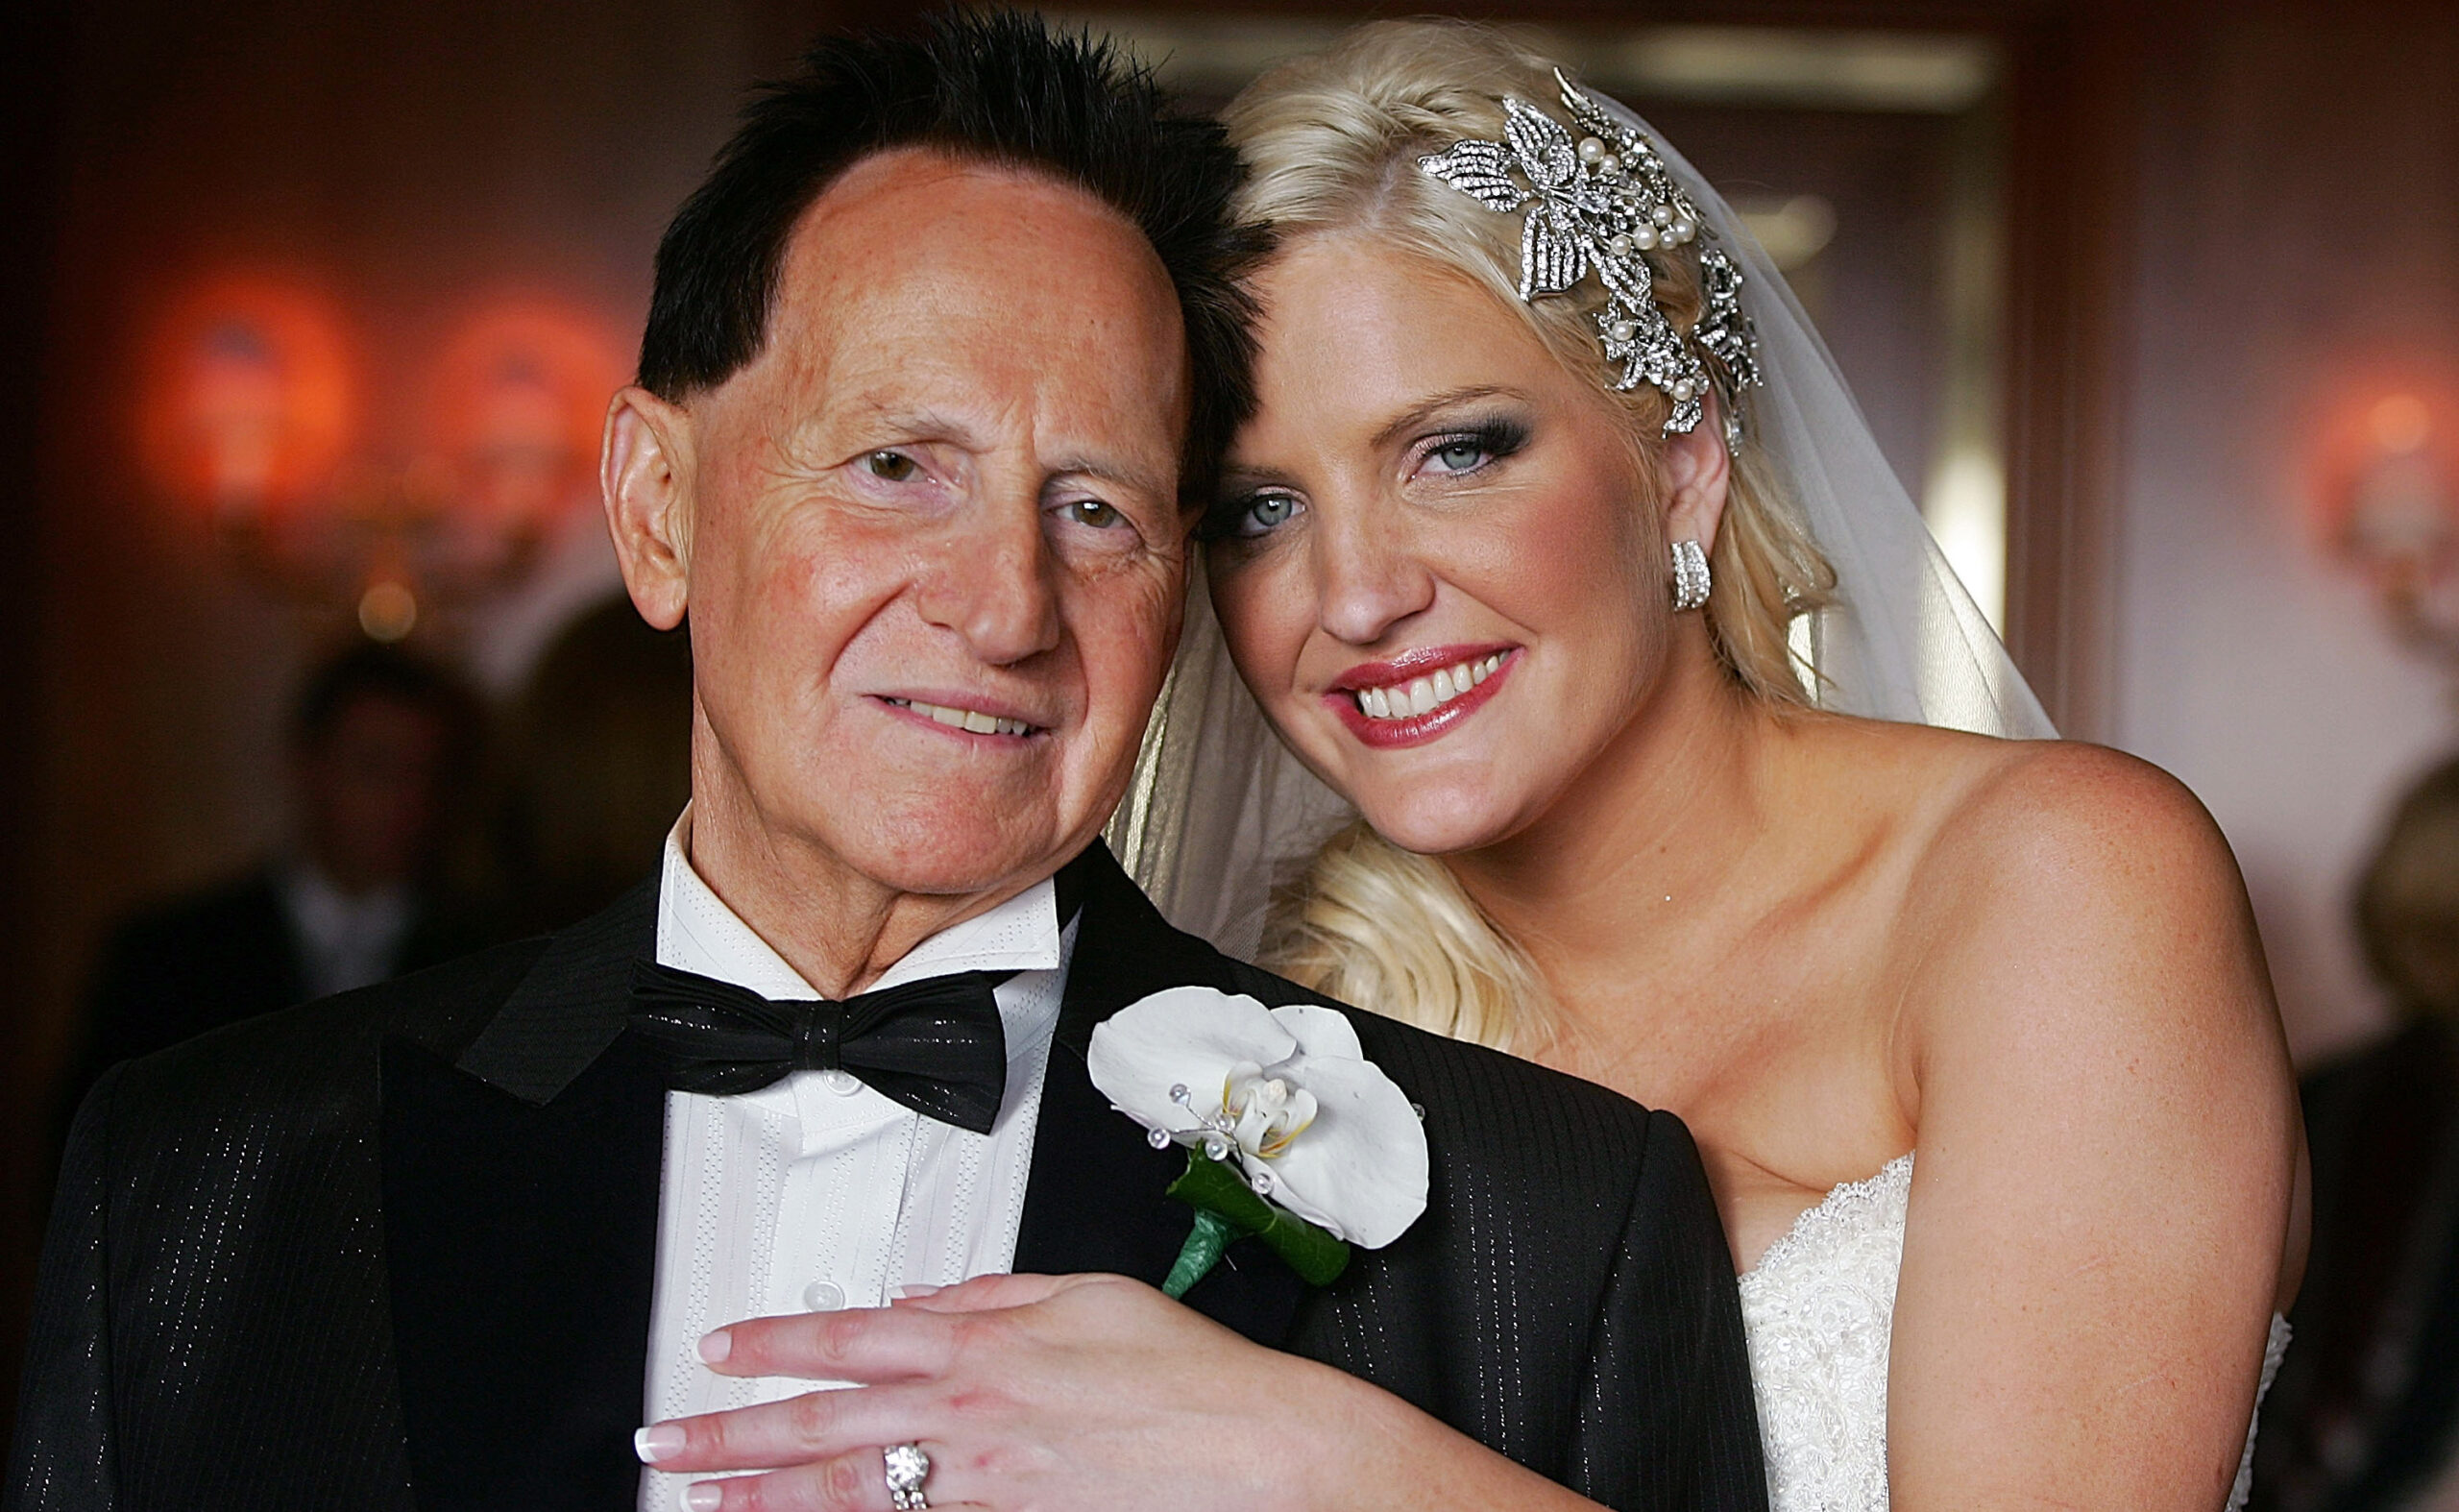 Brynne Edelsten’s love life has more curves than her figure! Meet all the people she’s dated since Geoffrey Edelsten